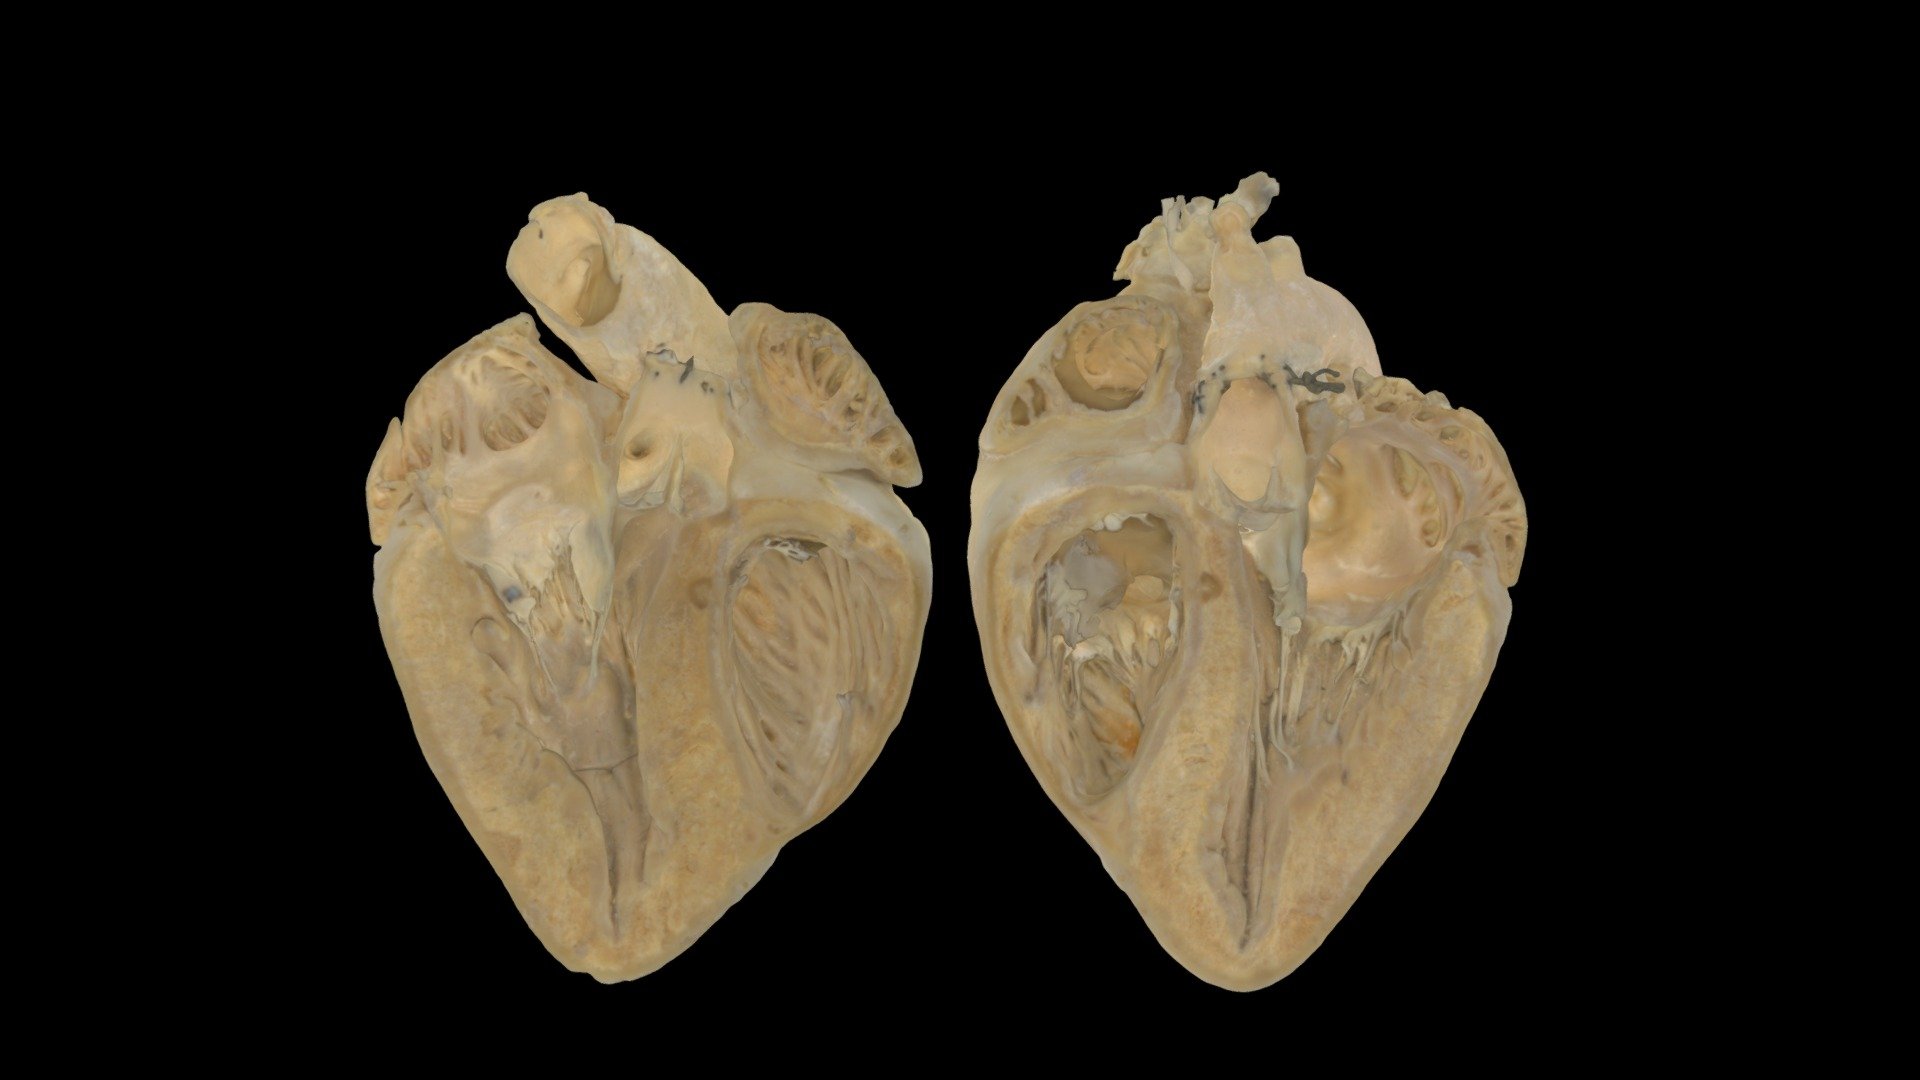 A plastinated Porcine (pig) heart cut coronally to form a posterior half (right) and an anterior half (left).

To learn more about cardiac anatomy, visit the Atlas of Human Cardiac Anatomy - Porcine Heart Anatomical Plane #0001 - Download Free 3D model by VisibleHeartLabs 3d model